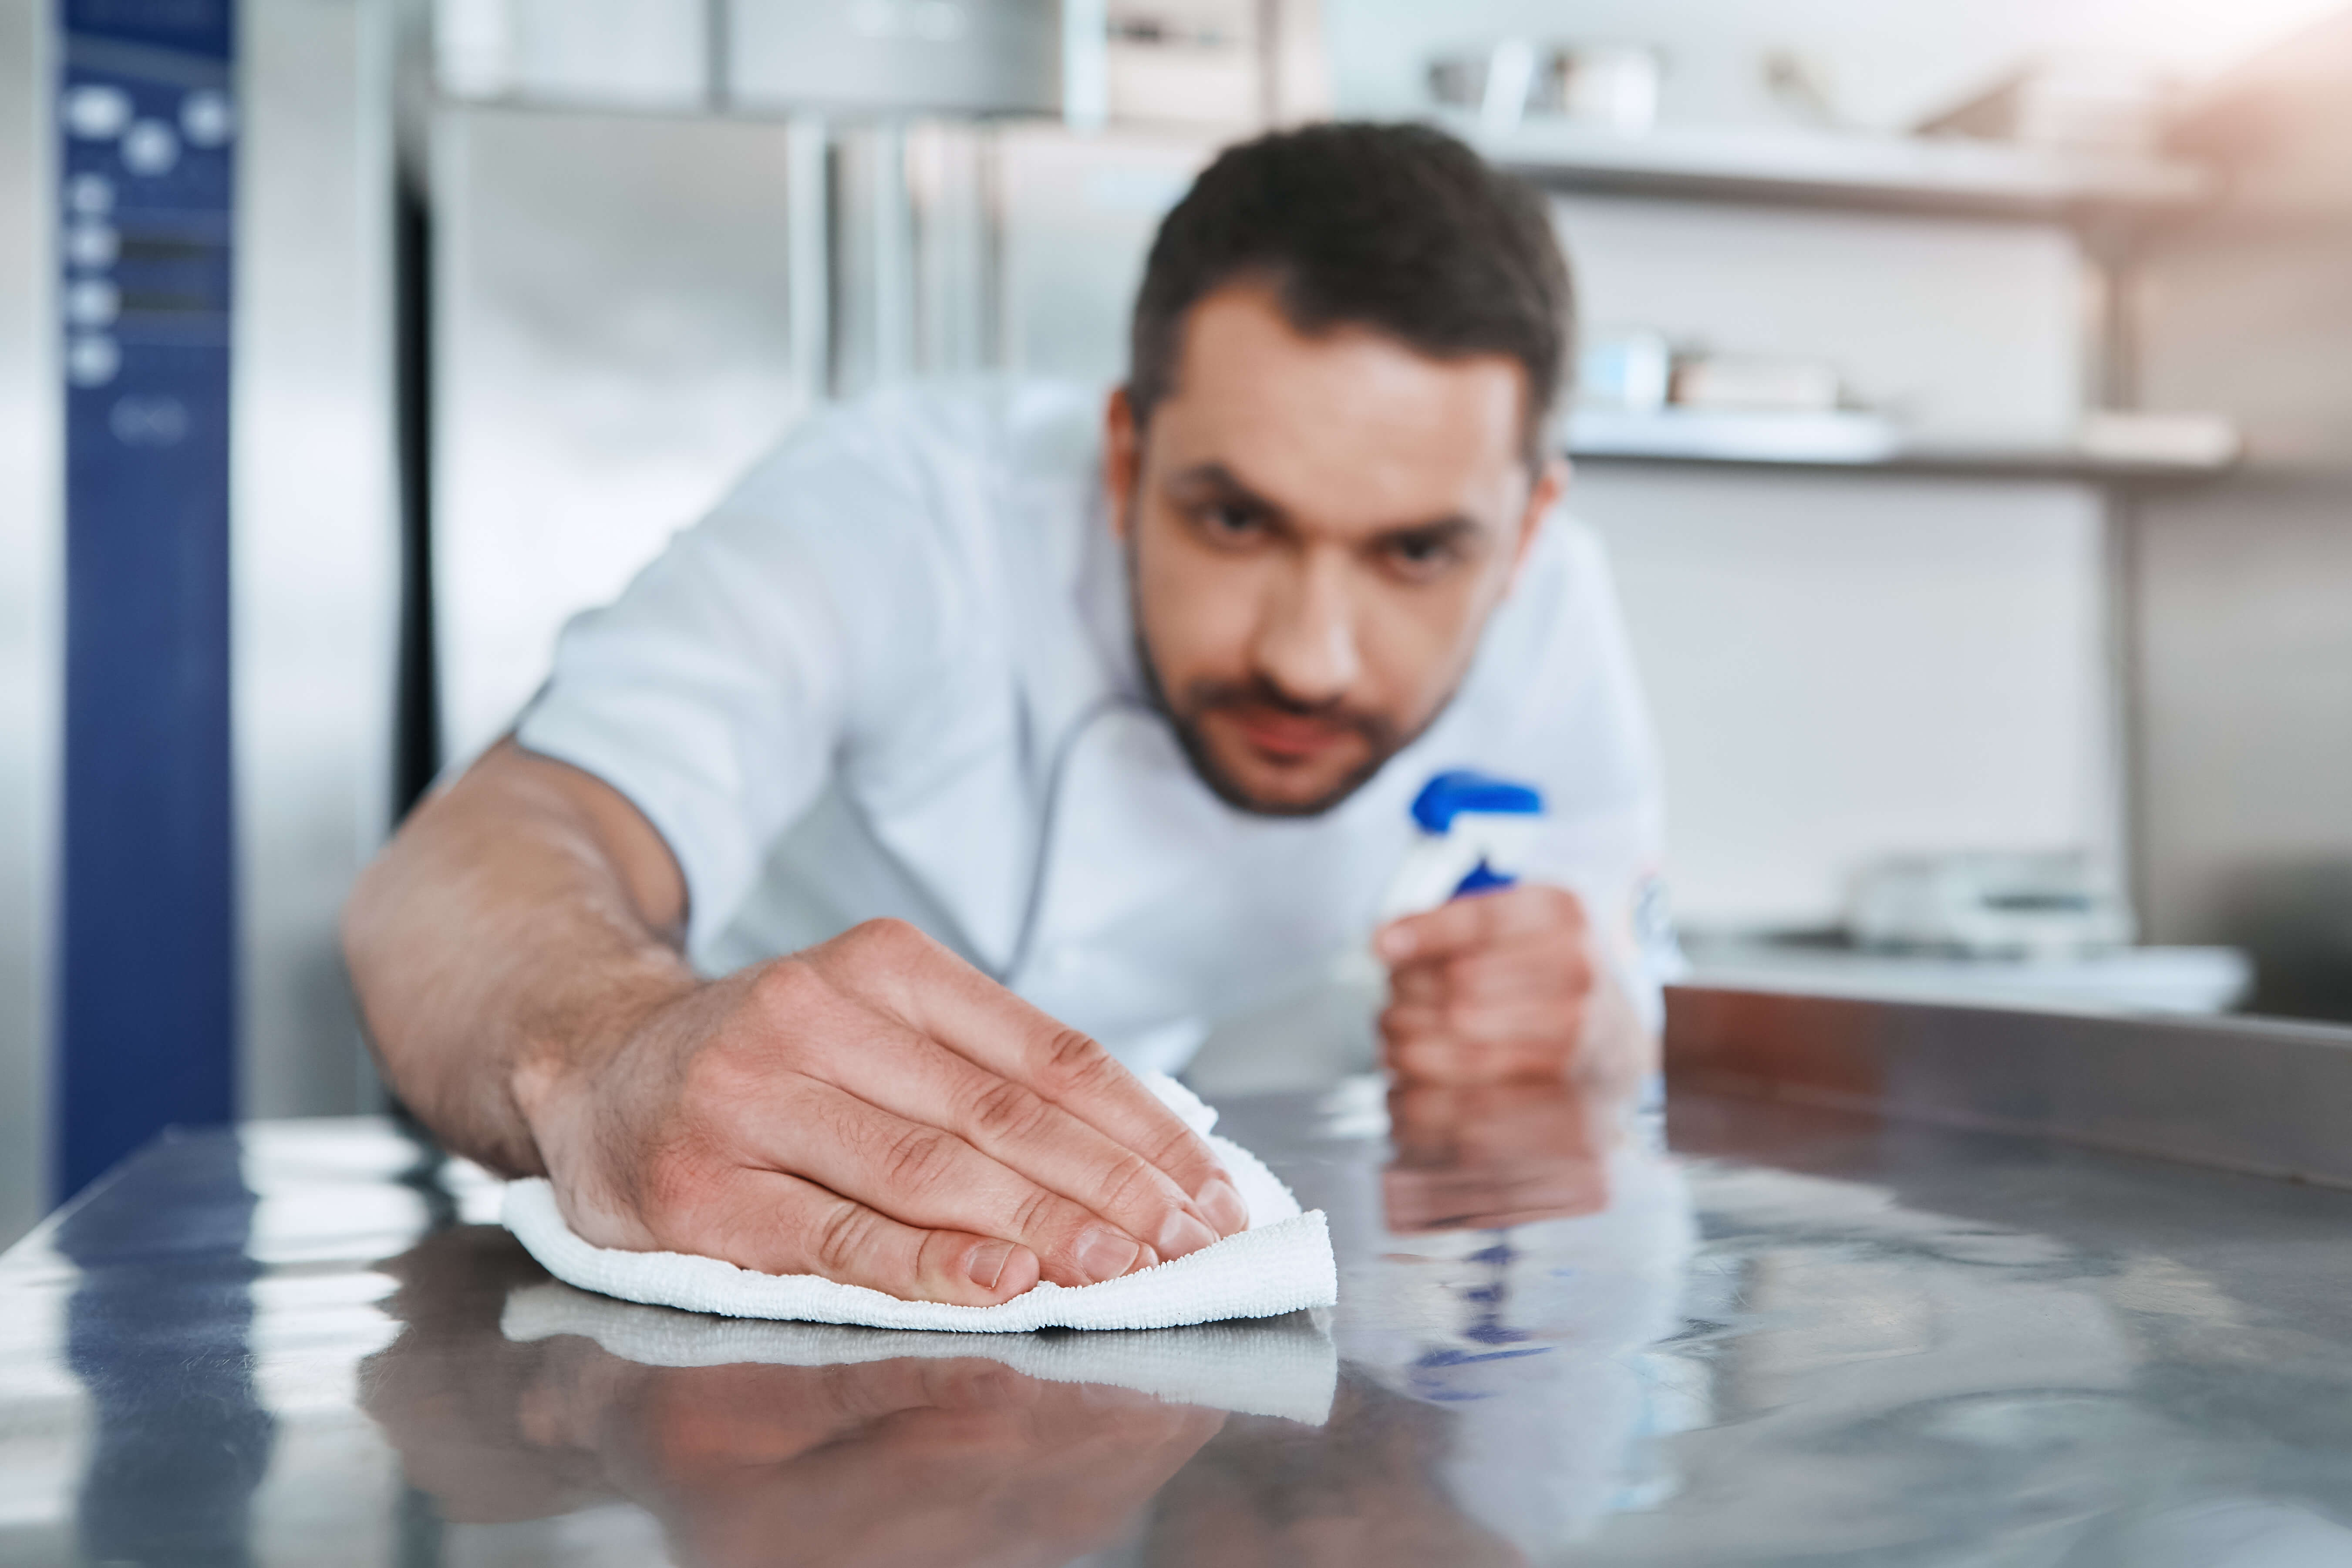 A chef wiping down a cooking surface